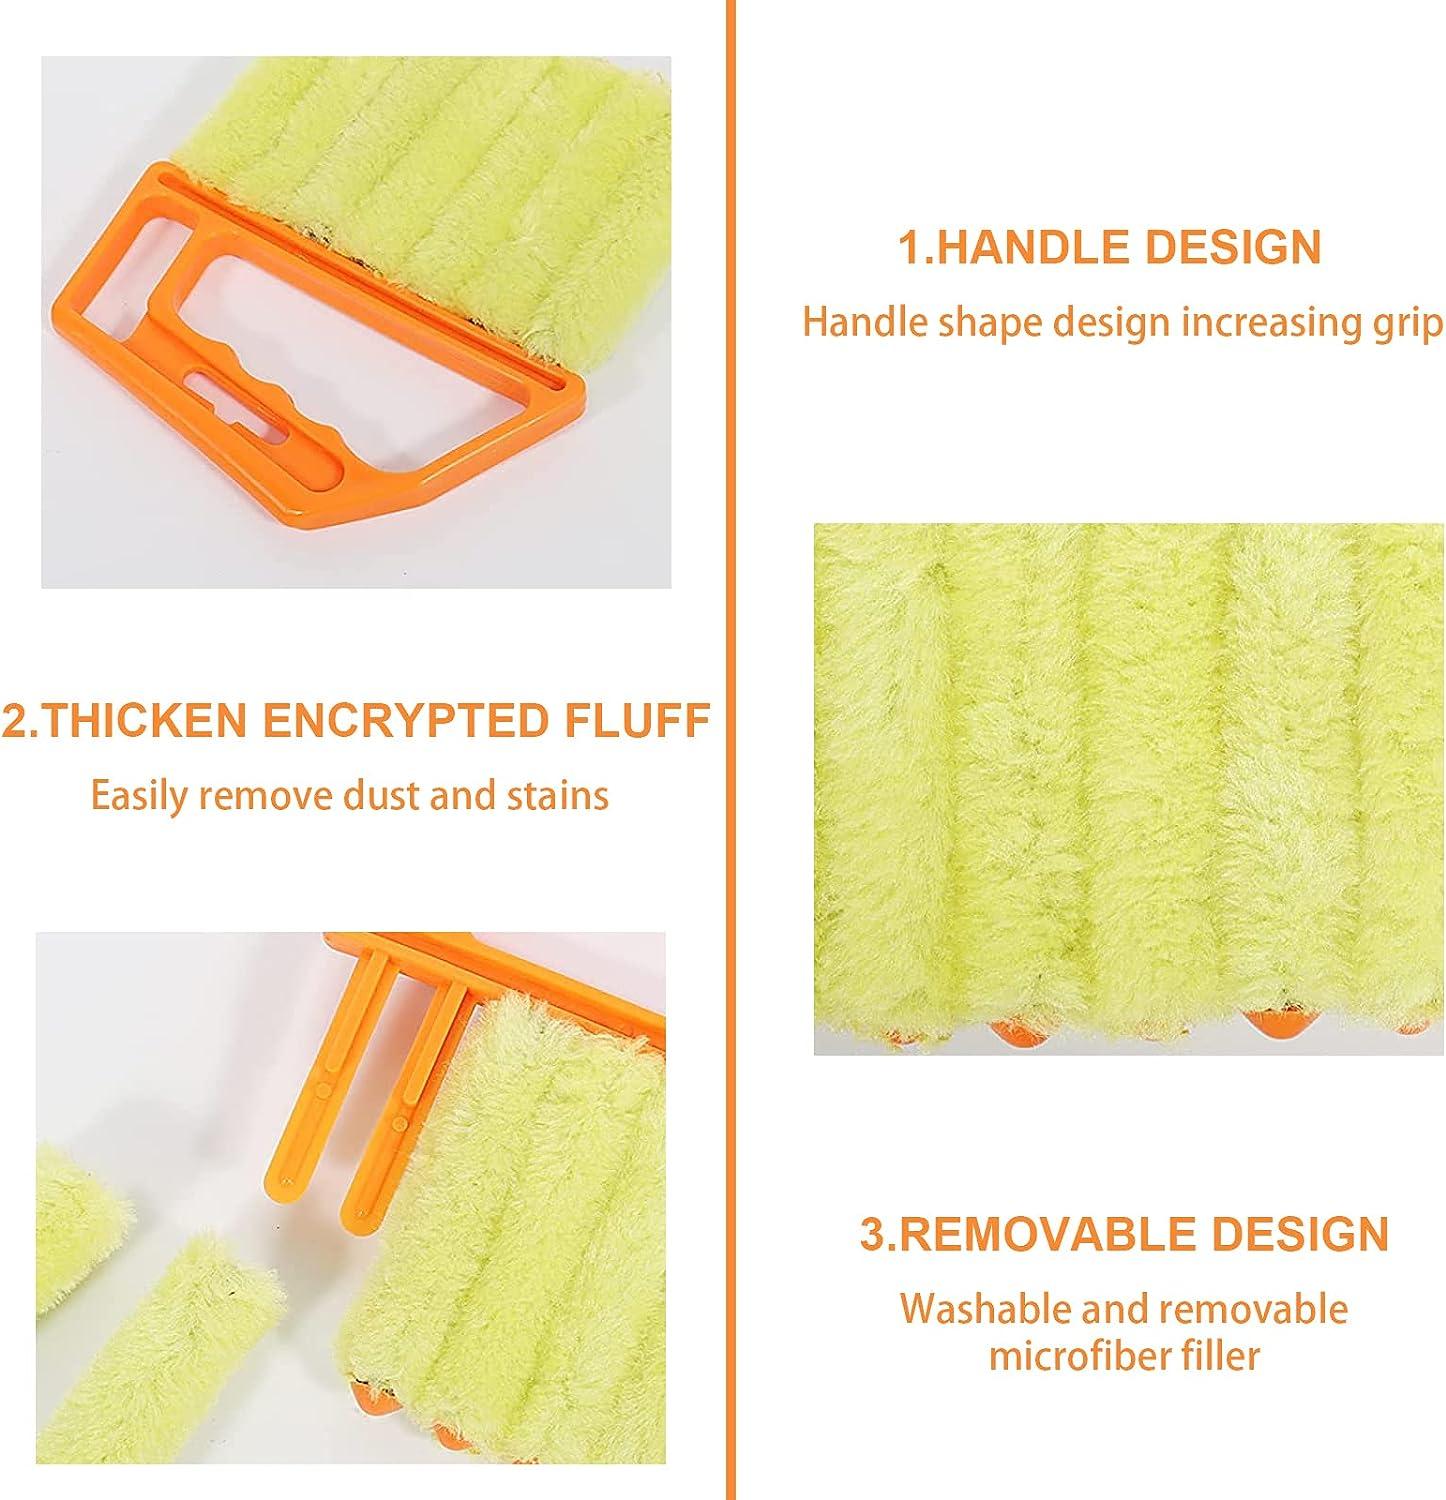 2PCS Blinds Cleaning Brush, Detachable & Washable Blind Cleaner